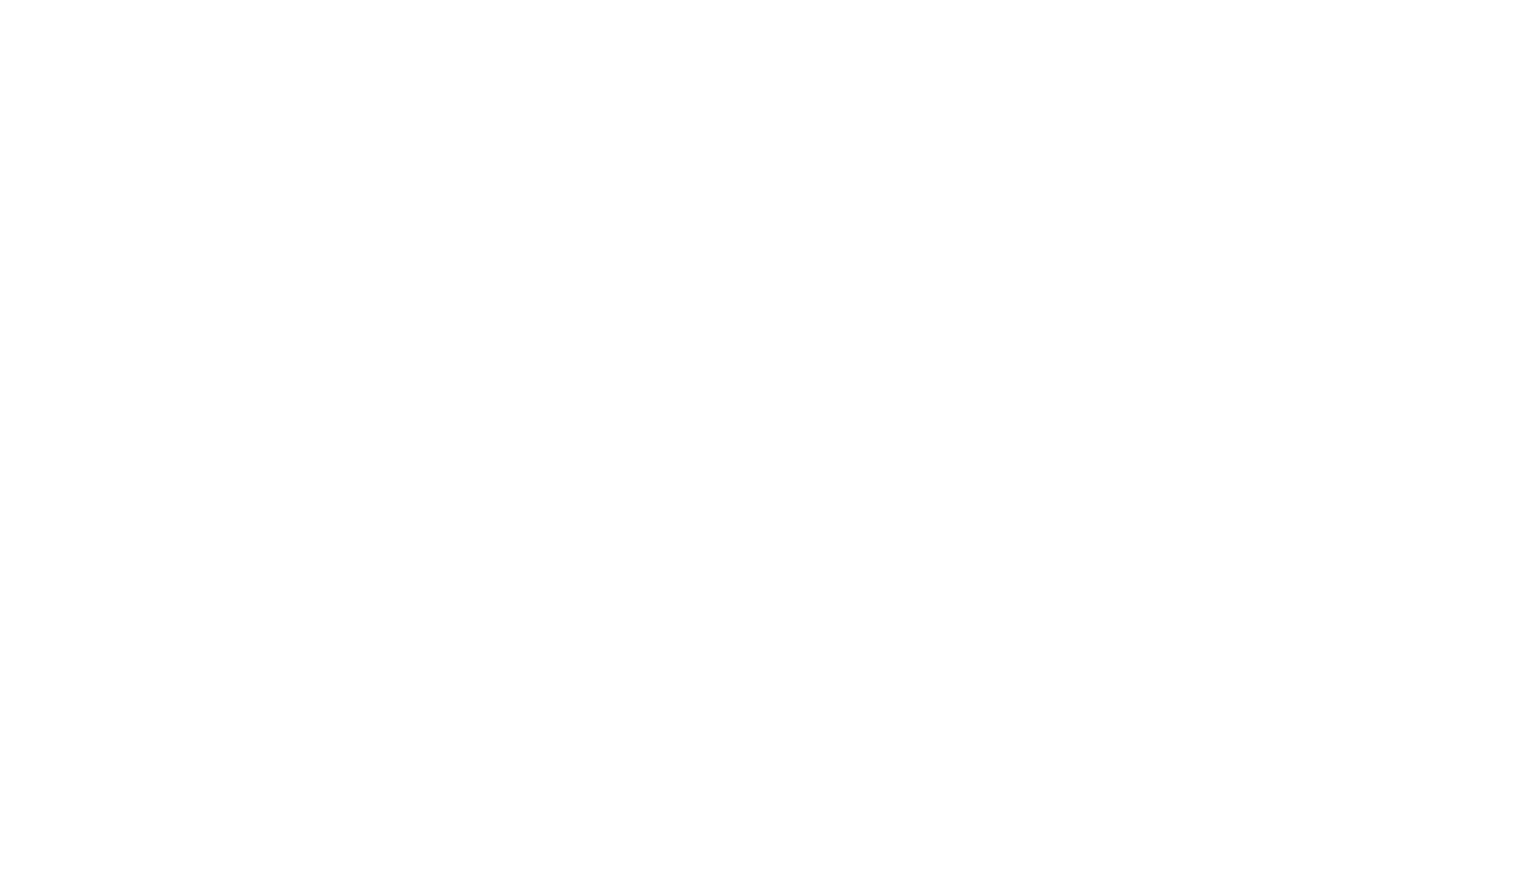 Qatar Electricity & Water Company logo large for dark backgrounds (transparent PNG)